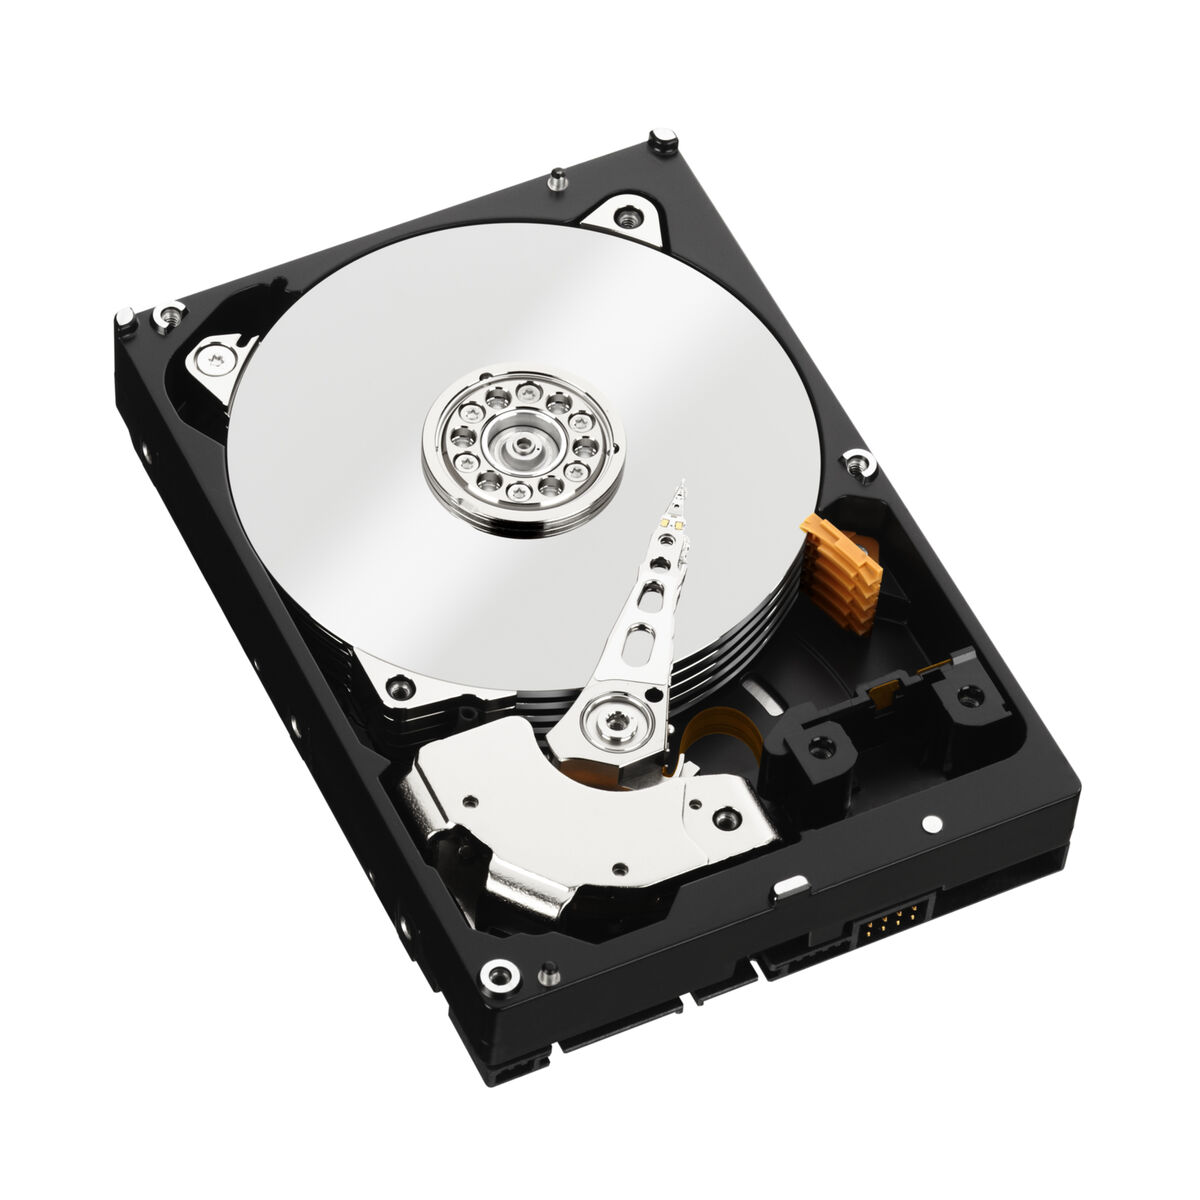 HDD WD Red Plus WD60EFZX 6TB/8,9/600 Sata III 128MB (D)